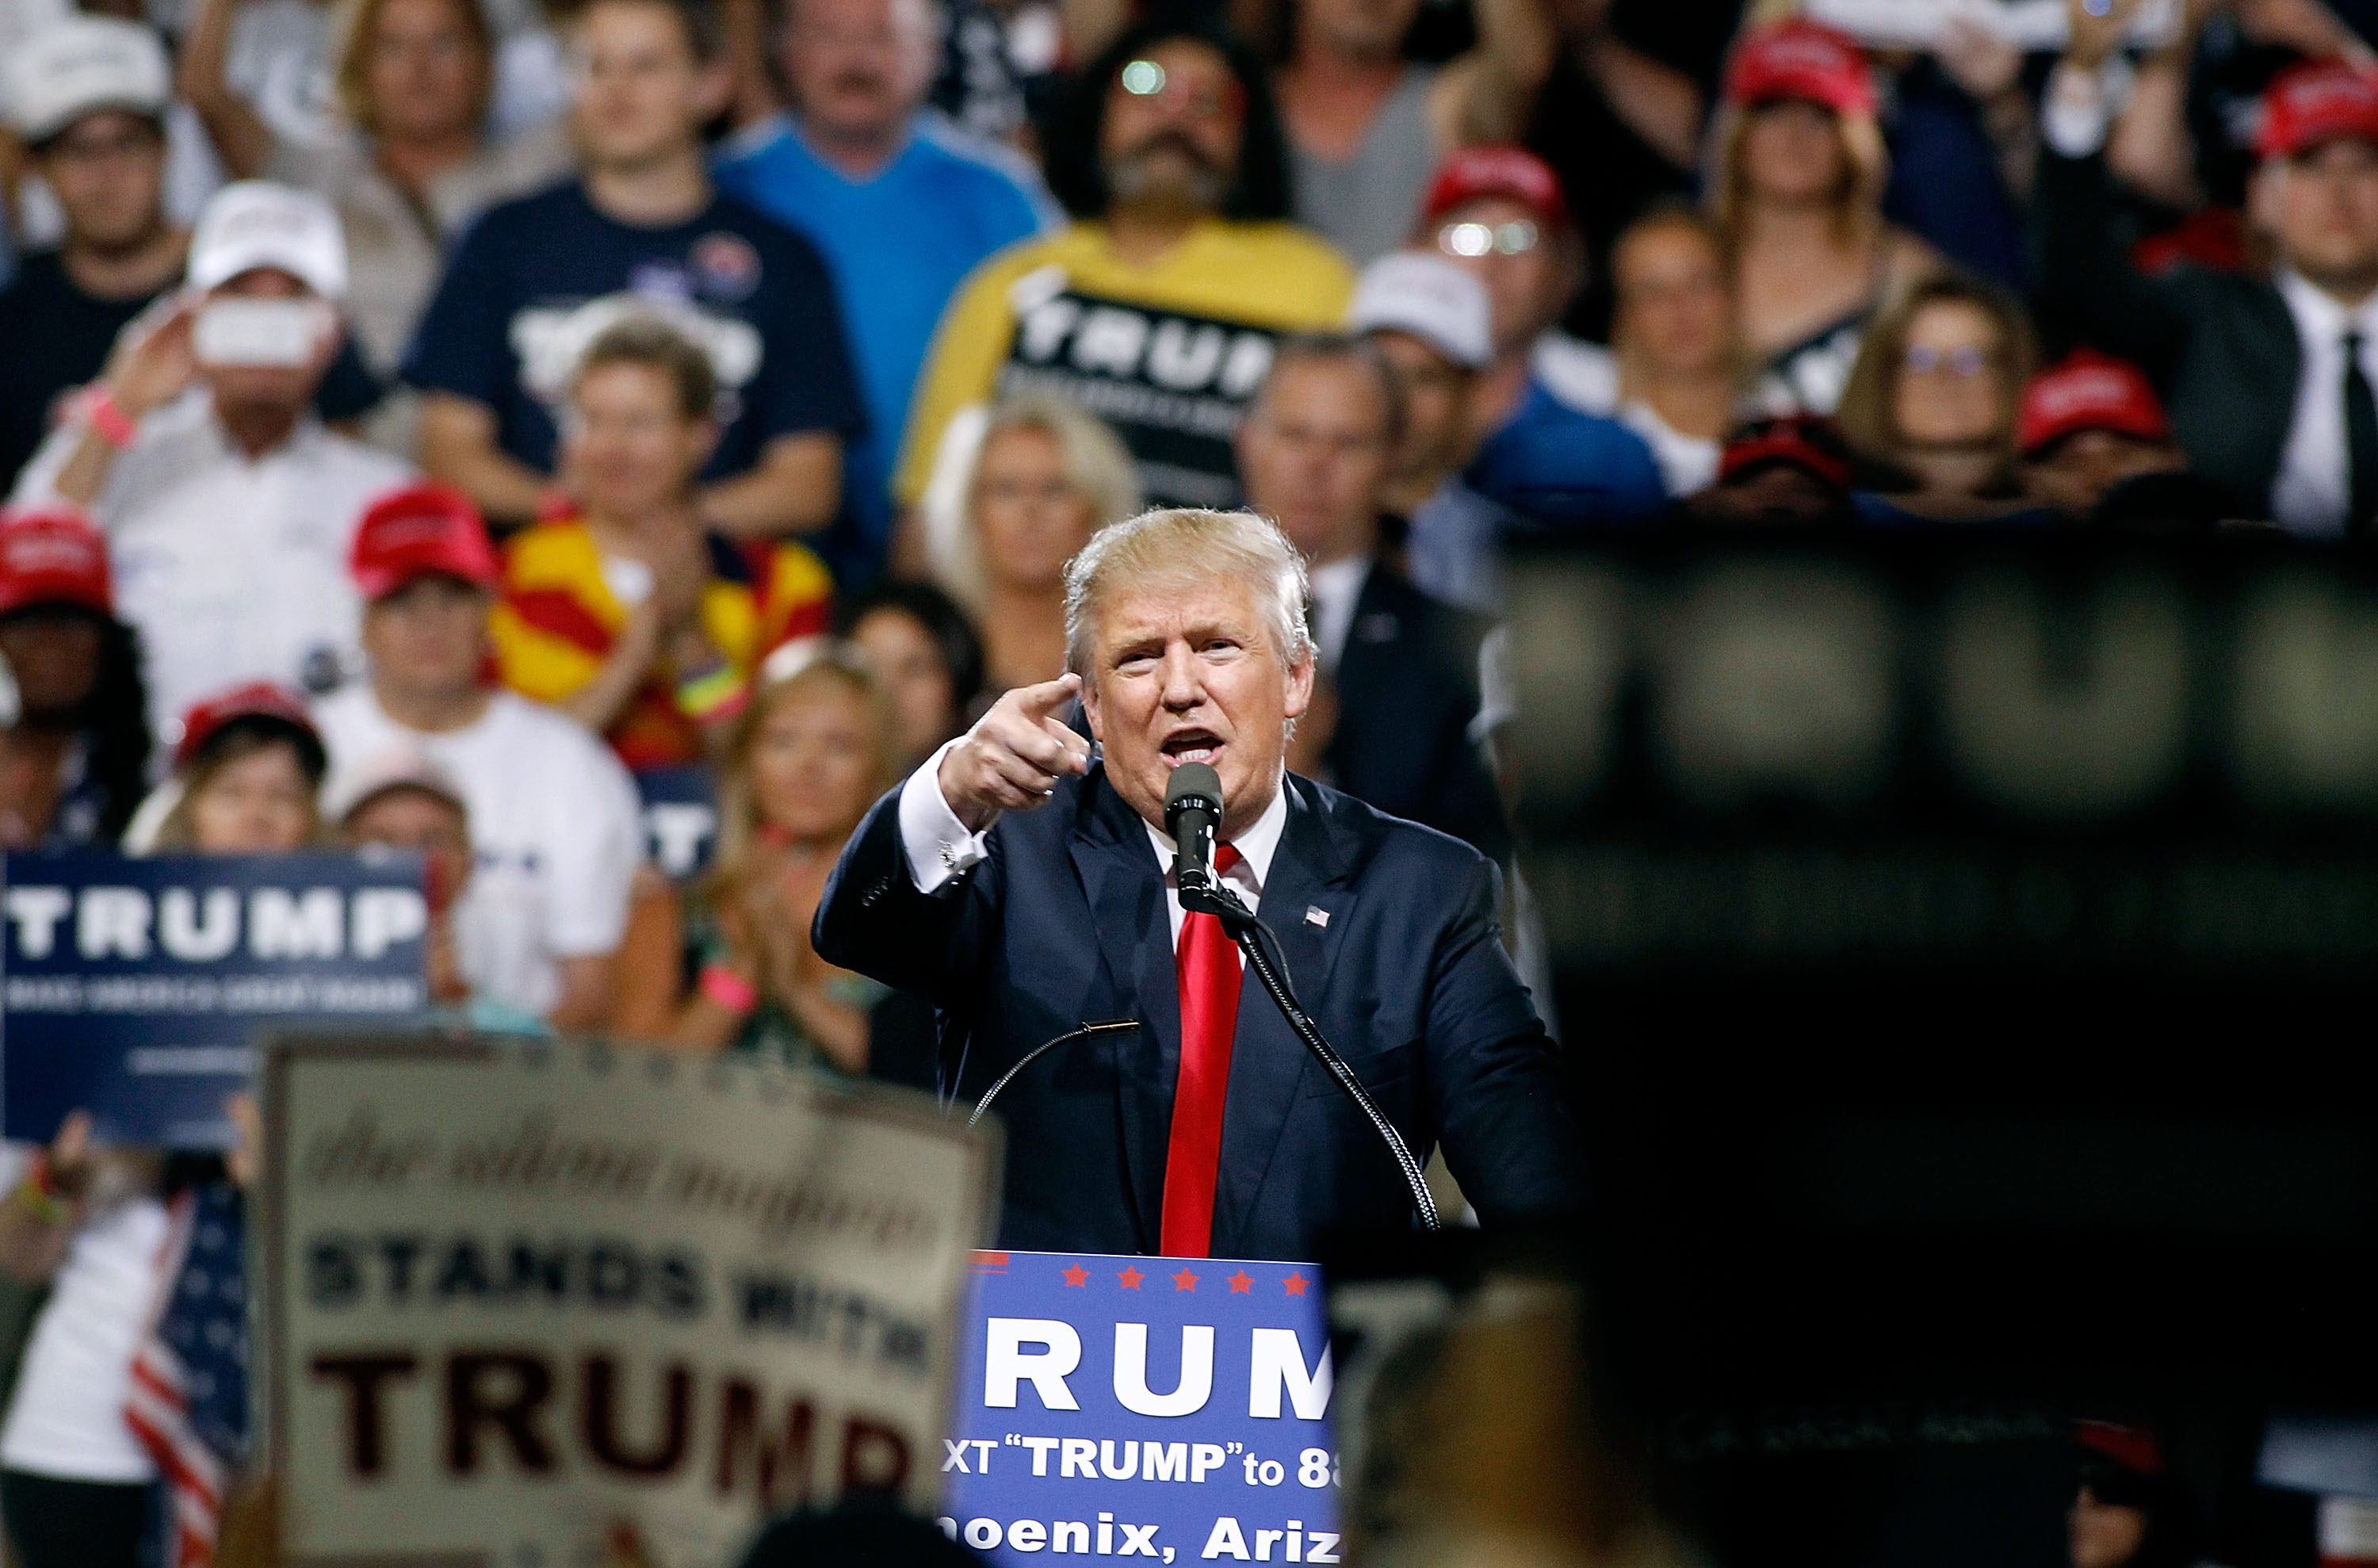 Republican presidential candidate Donald Trump speaks to a crowd of supporters during a campaign rally on June 18, 2016 in Phoenix, Arizona. (Ralph Freso&mdash;Getty Images)